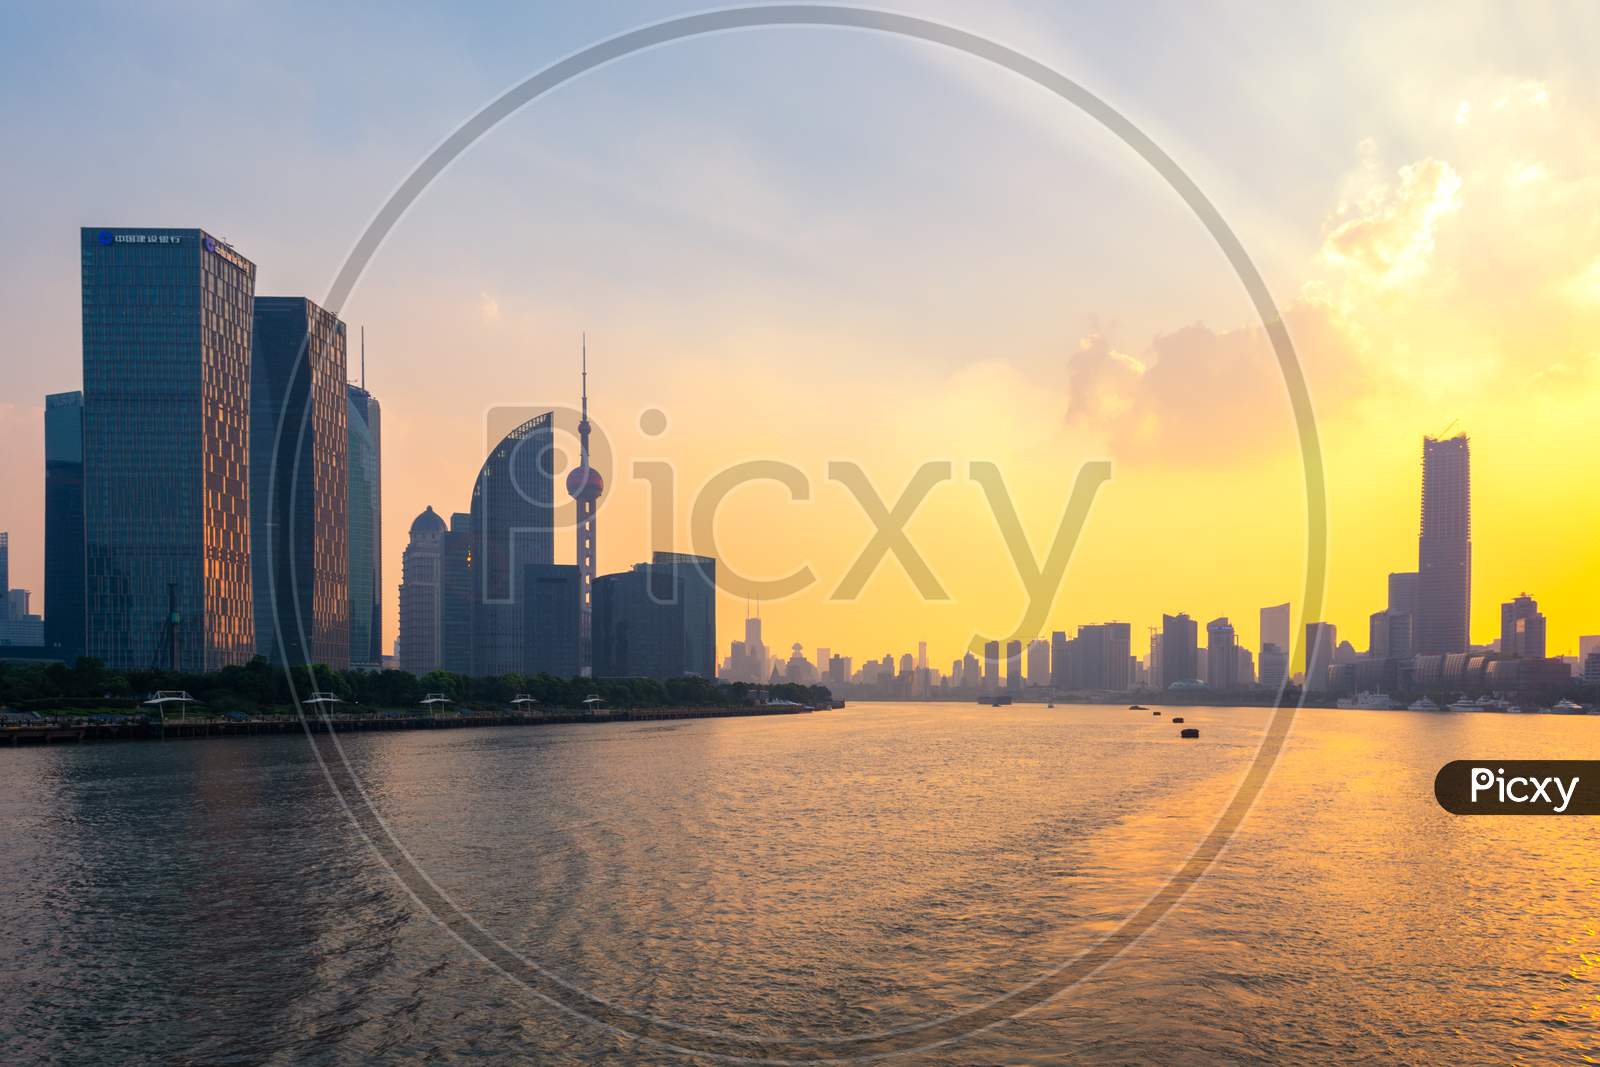 Iconic Lujiazui Skyline Of Shanghai And The Huangpu River At Sunset